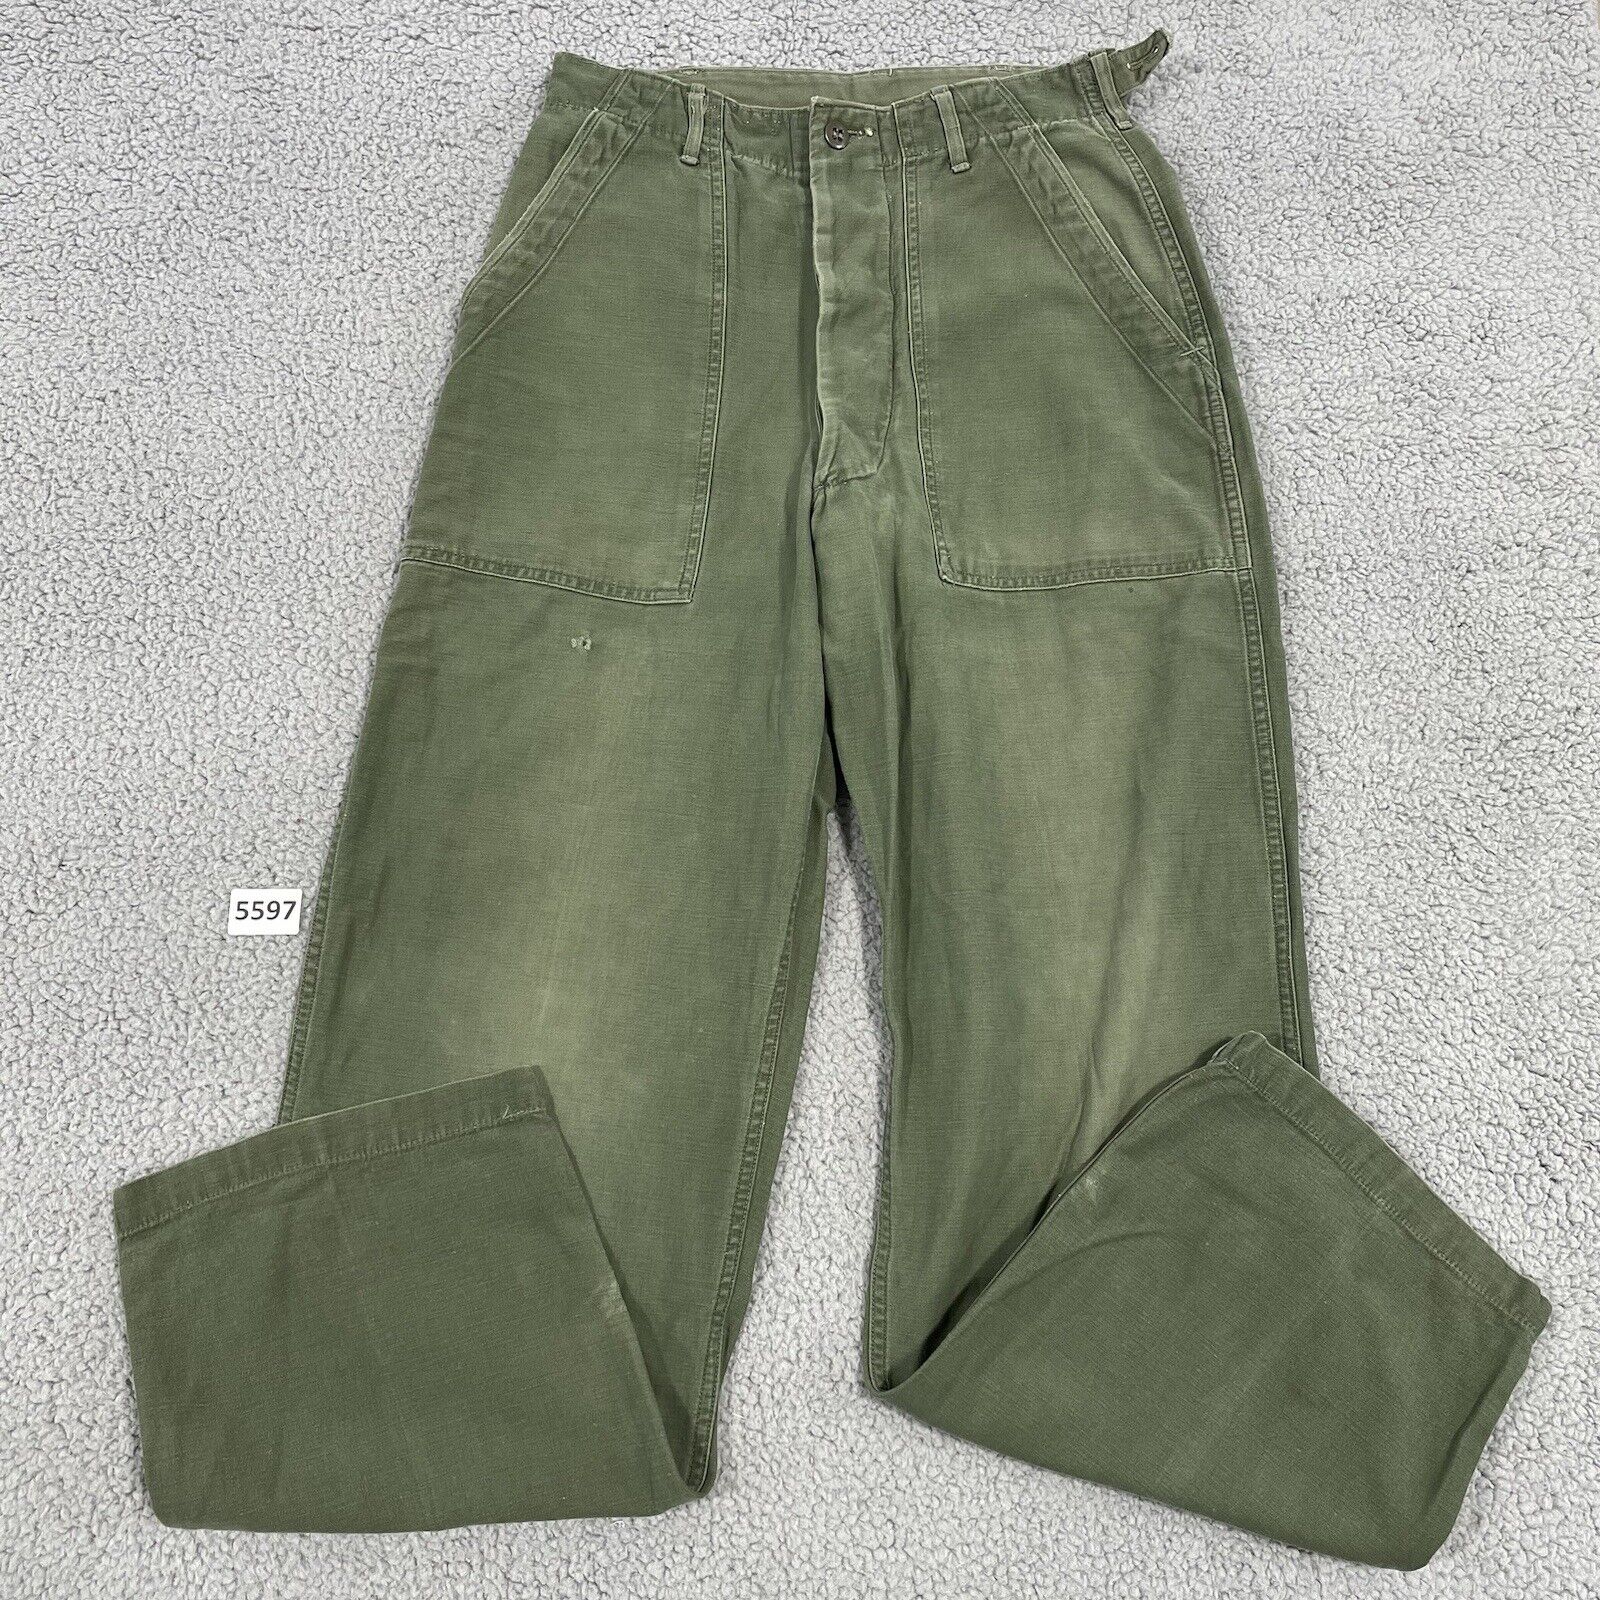 Vintage 1948 OG-107 Sateen Utility Pants Size 27 x 30 Military Green Trousers